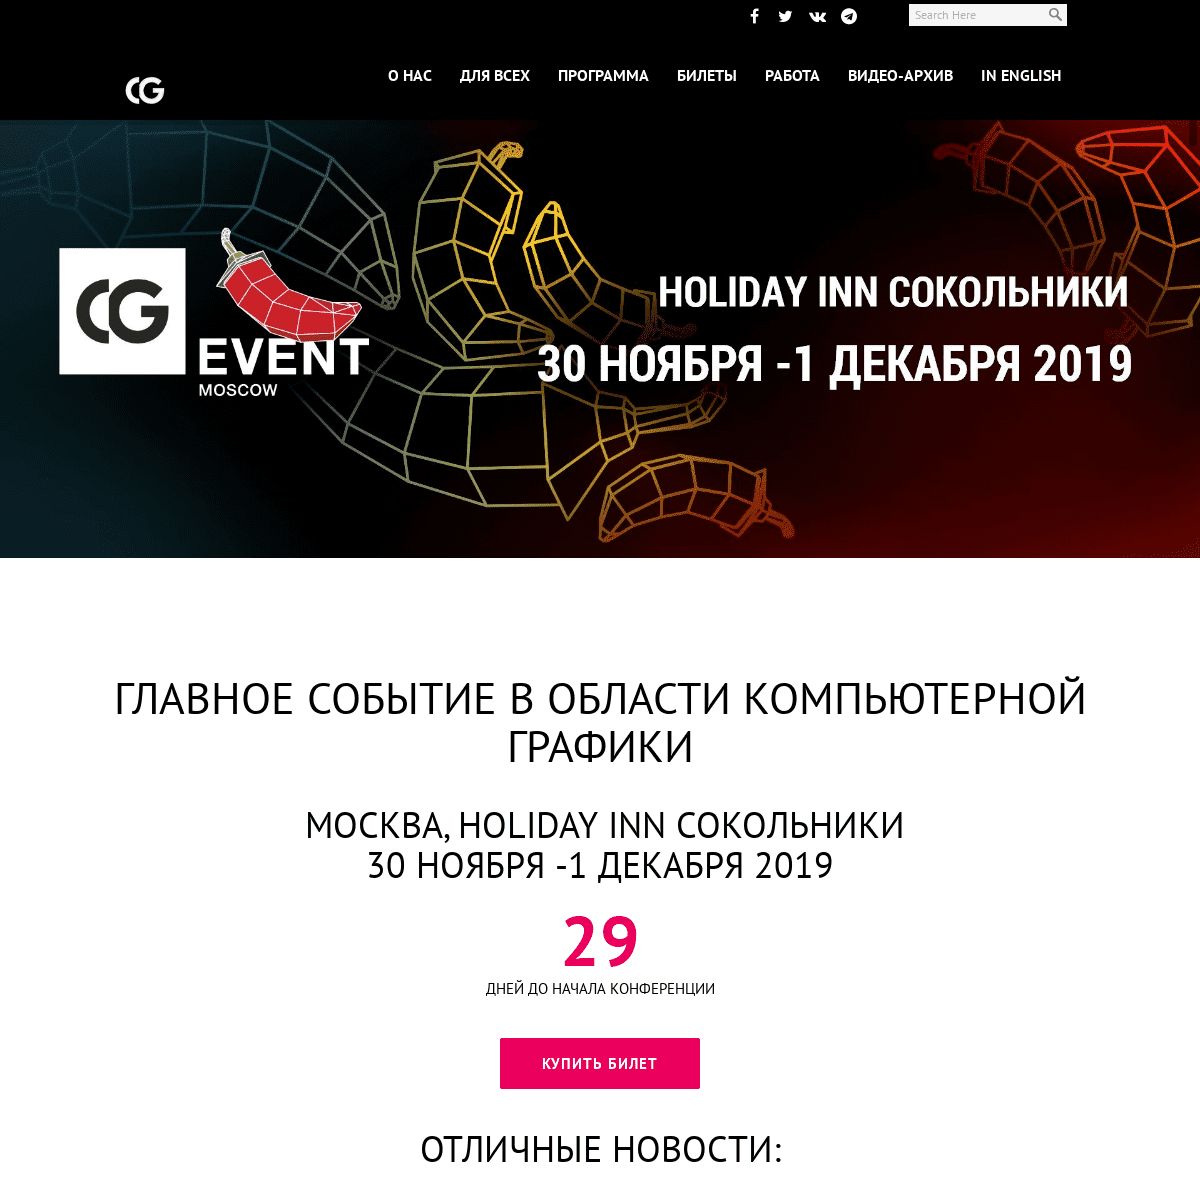 A complete backup of cgevent.ru